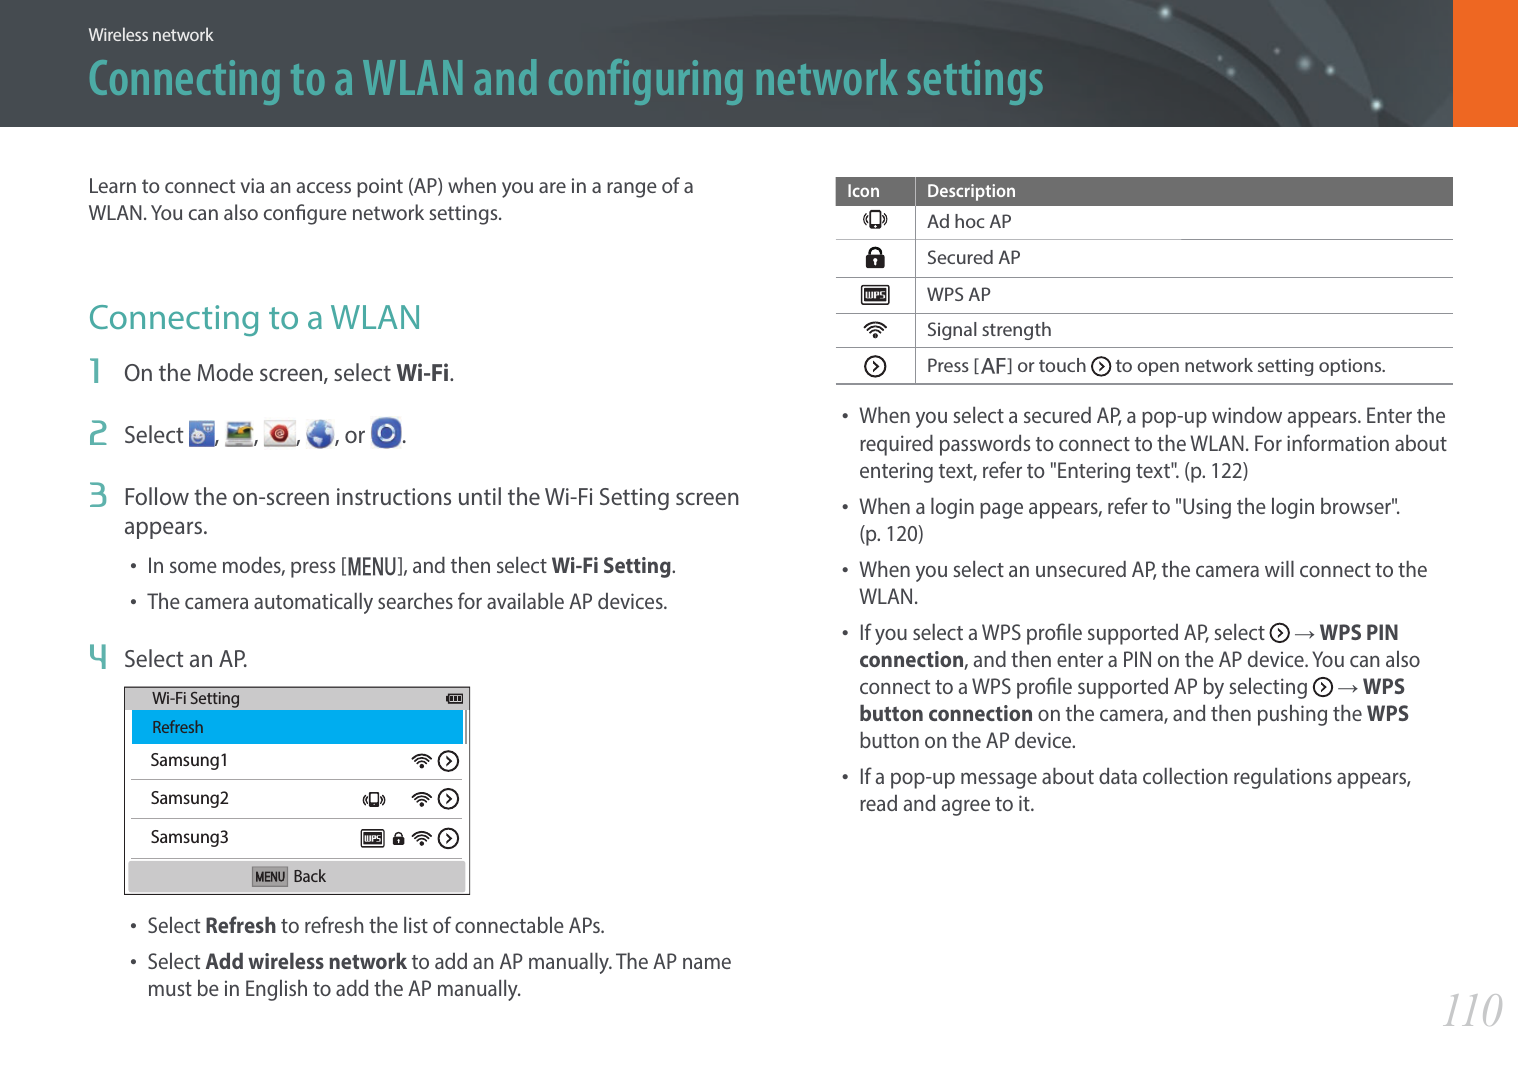 110Wireless networkConnecting to a WLAN and configuring network settingsLearn to connect via an access point (AP) when you are in a range of a WLAN. You can also congure network settings.Connecting to a WLAN1  On the Mode screen, select Wi-Fi.2  Select  ,  ,  , , or  .3  Follow the on-screen instructions until the Wi-Fi Setting screen appears.• In some modes, press [m], and then select Wi-Fi Setting.• The camera automatically searches for available AP devices.4  Select an AP.Samsung1Samsung2Samsung3Wi-Fi SettingRefreshBack• Select Refresh to refresh the list of connectable APs.• Select Add wireless network to add an AP manually. The AP name must be in English to add the AP manually.Icon DescriptionAd hoc APSecured APWPS APSignal strengthPress [F] or touch   to open network setting options.• When you select a secured AP, a pop-up window appears. Enter the required passwords to connect to the WLAN. For information about entering text, refer to &quot;Entering text&quot;. (p. 122)• When a login page appears, refer to &quot;Using the login browser&quot;.  (p. 120)• When you select an unsecured AP, the camera will connect to the WLAN.• If you select a WPS prole supported AP, select   ĺ WPS PIN connection, and then enter a PIN on the AP device. You can also connect to a WPS prole supported AP by selecting   ĺ WPS button connection on the camera, and then pushing the WPS button on the AP device.• If a pop-up message about data collection regulations appears, read and agree to it. 